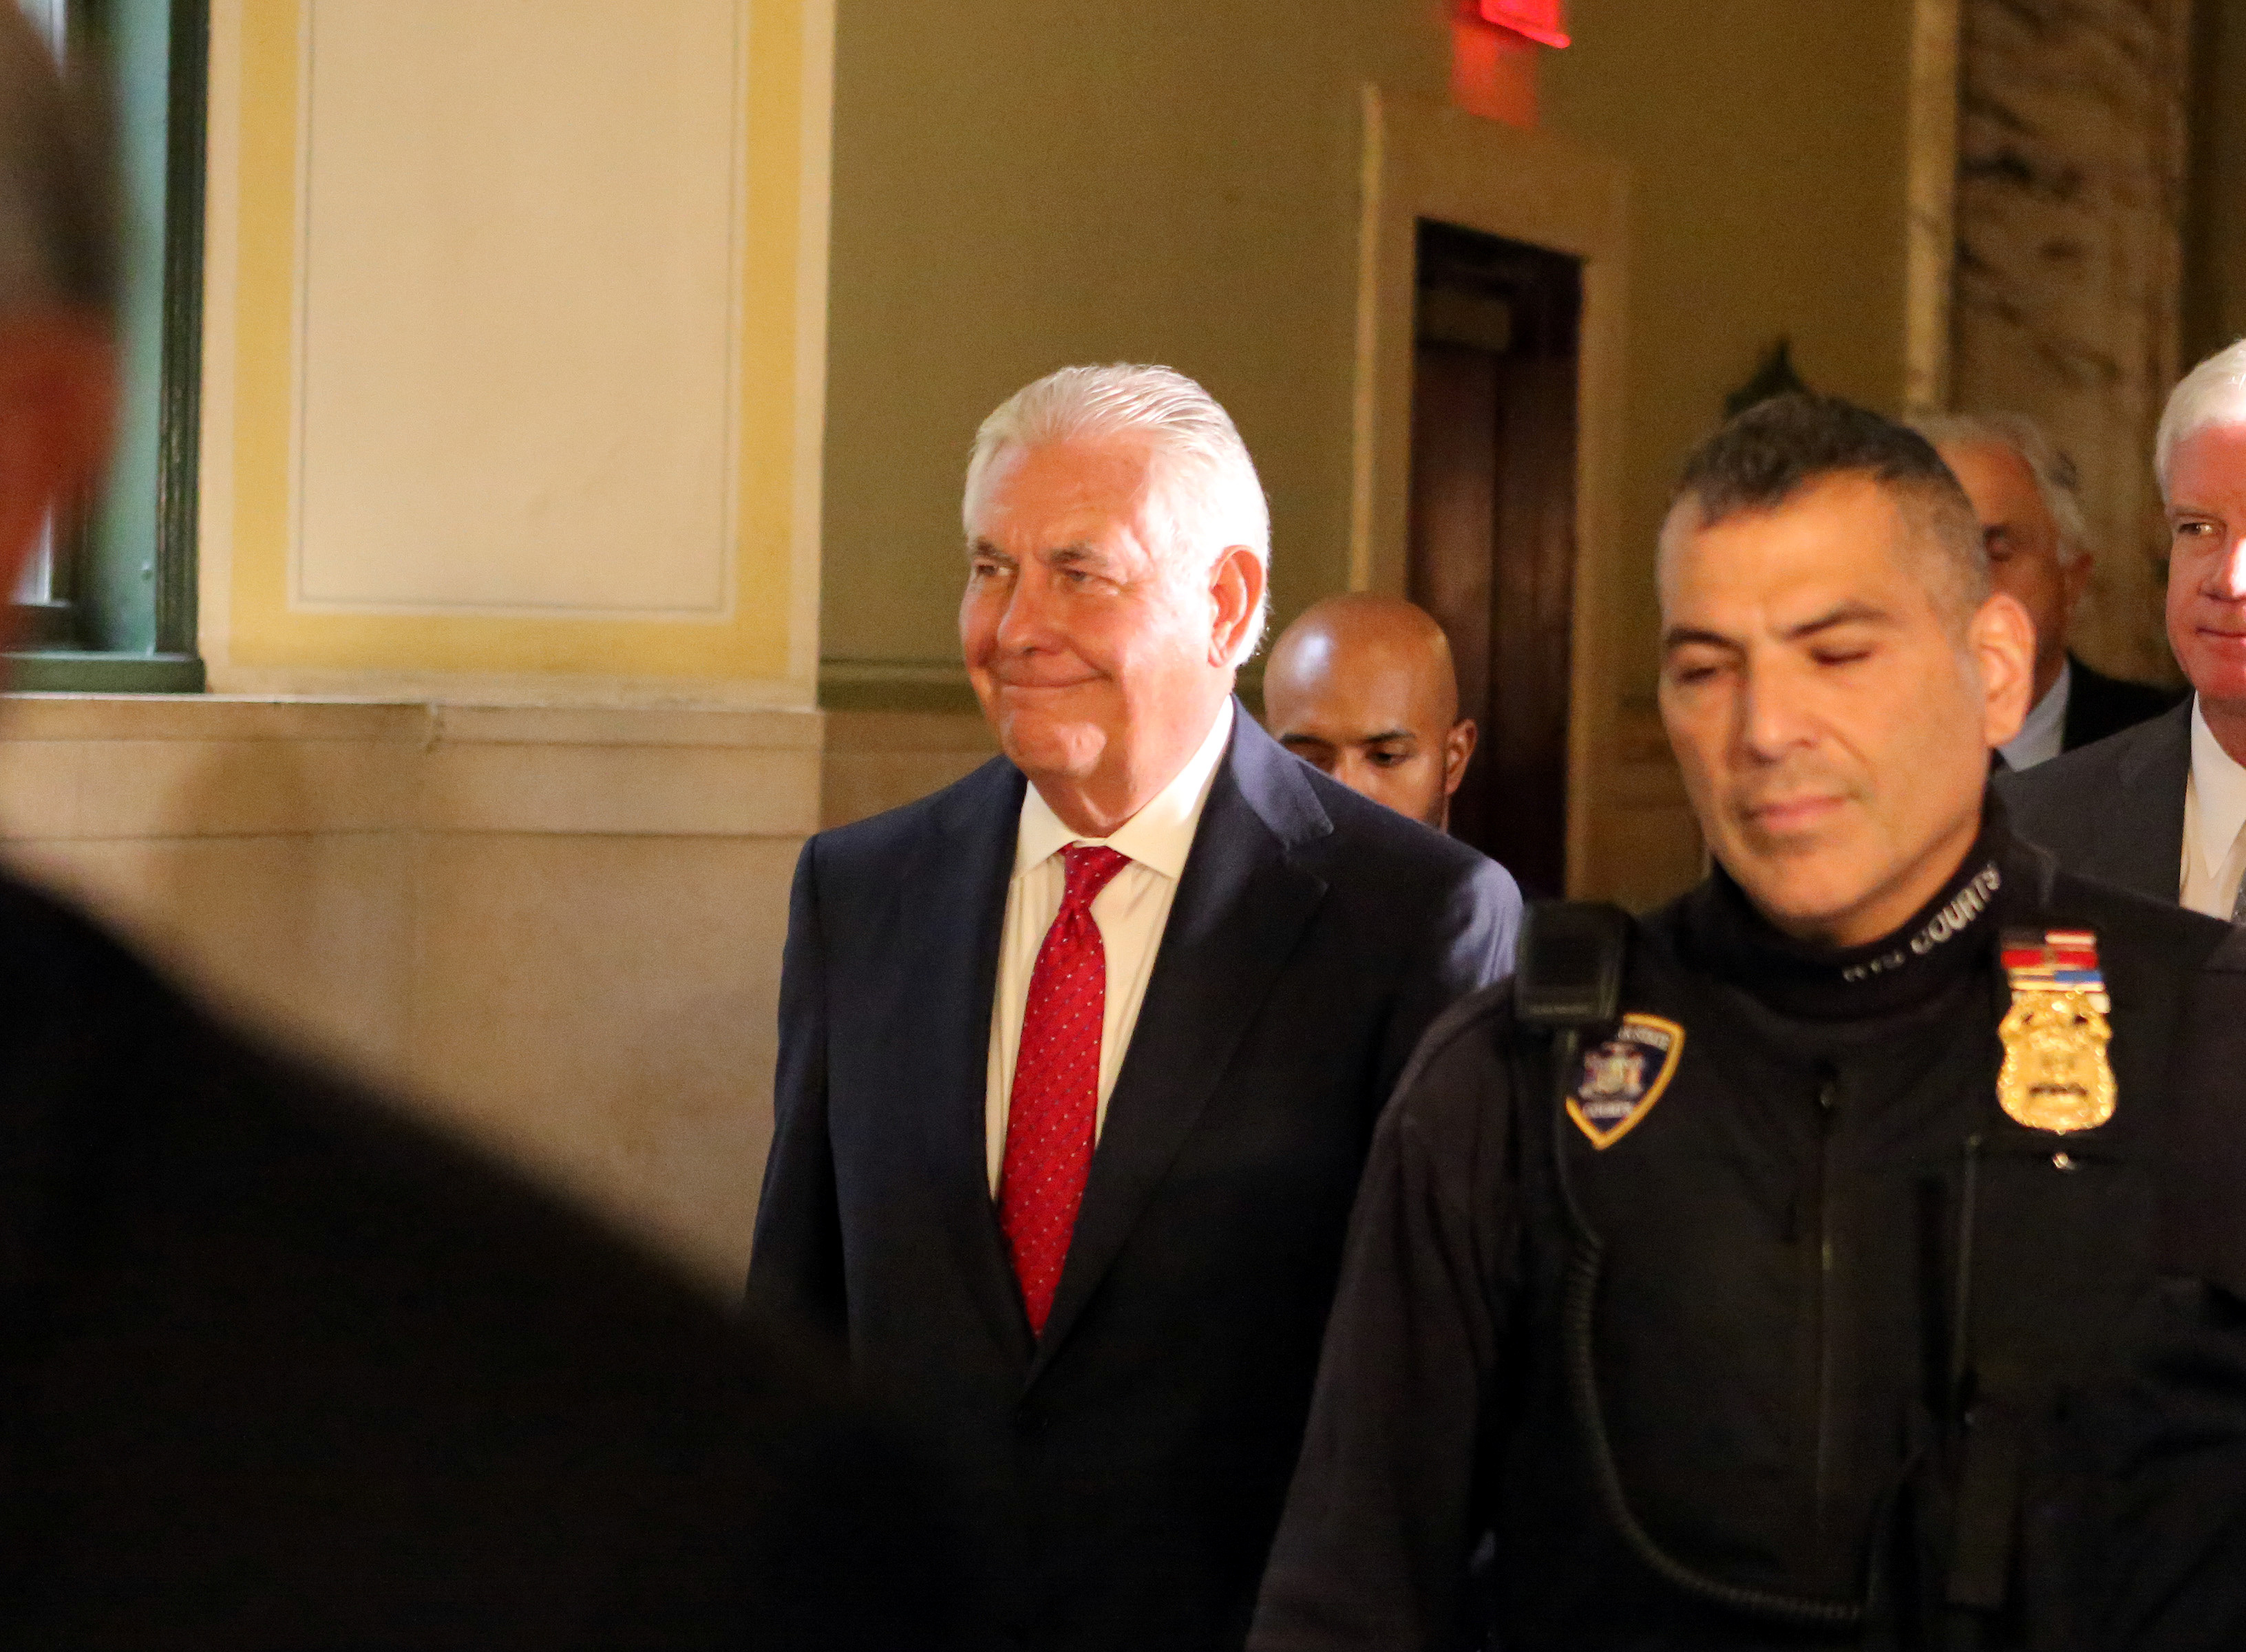 Rex Tillerson, former chairman and CEO of Exxon Mobil and former U.S. Secretary of State, leaves New York State Supreme Court in the Manhattan borough of New York City